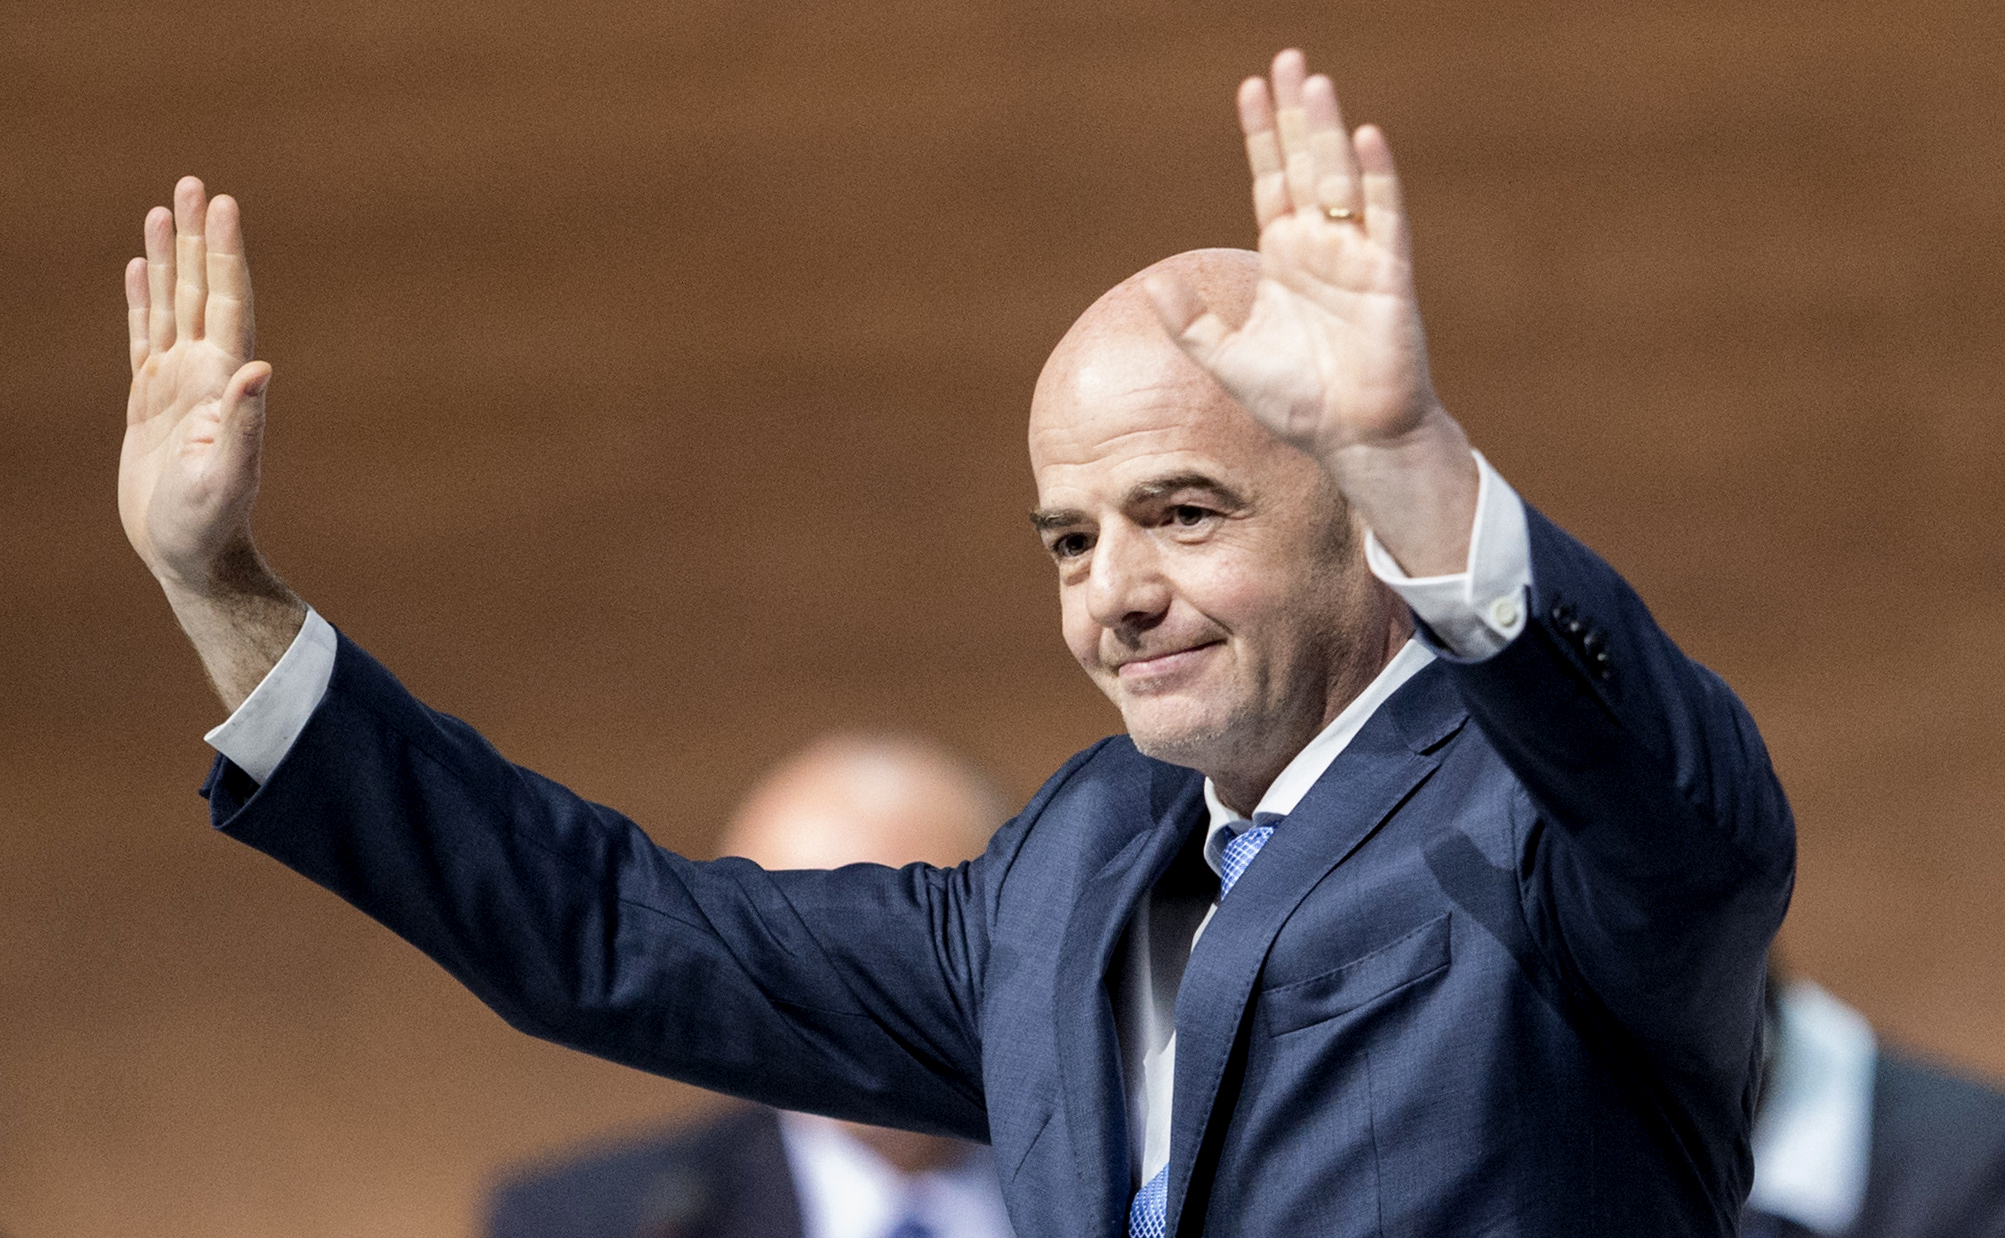 epa05182377 Swiss Gianni Infantino, new FIFA President, reacts after being elected as new FIFA President in the 2nd ballot, during the Extraordinary FIFA Congress 2016 held at the Hallenstadion in Zurich, Switzerland, 26 February 2016. The Extraordinary FIFA Congress is being held in order to vote on the proposals for amendments to the FIFA Statutes and choose the new FIFA President.  EPA/ENNIO LEANZA